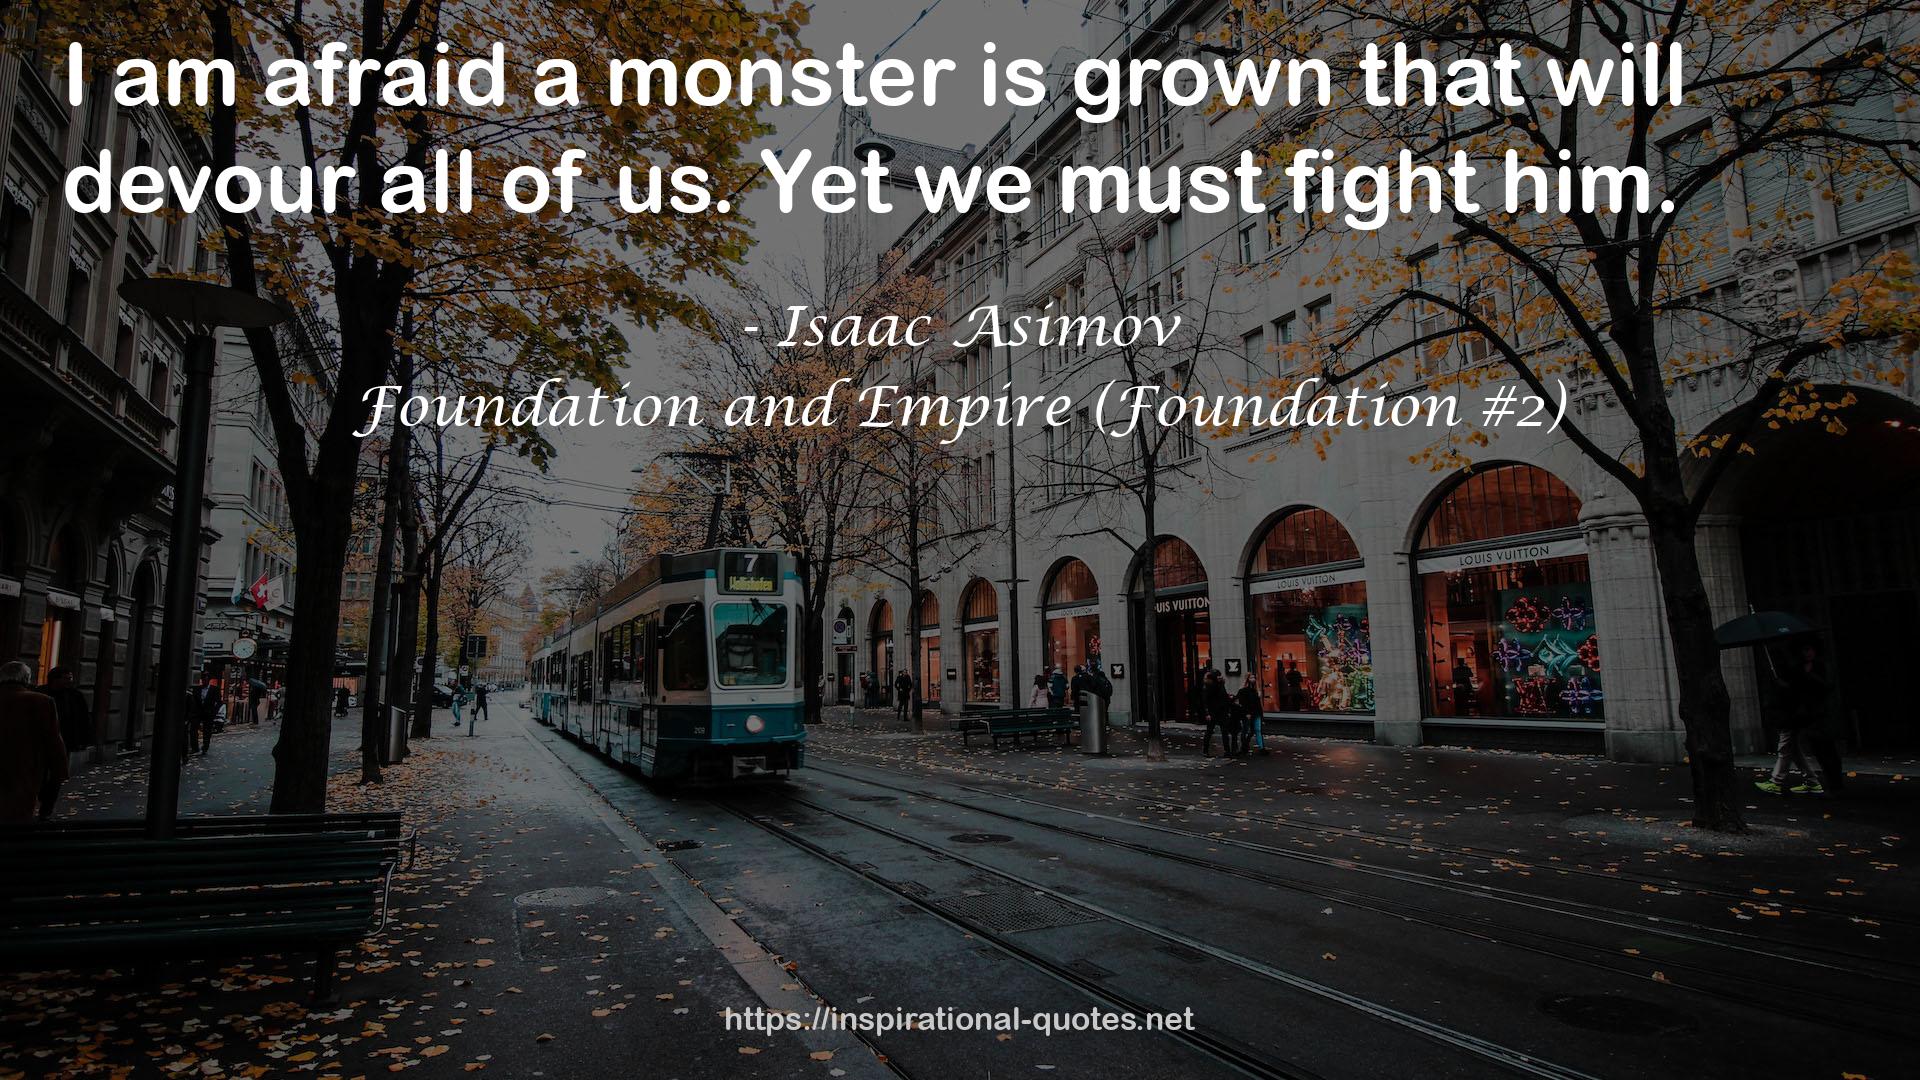 Foundation and Empire (Foundation #2) QUOTES